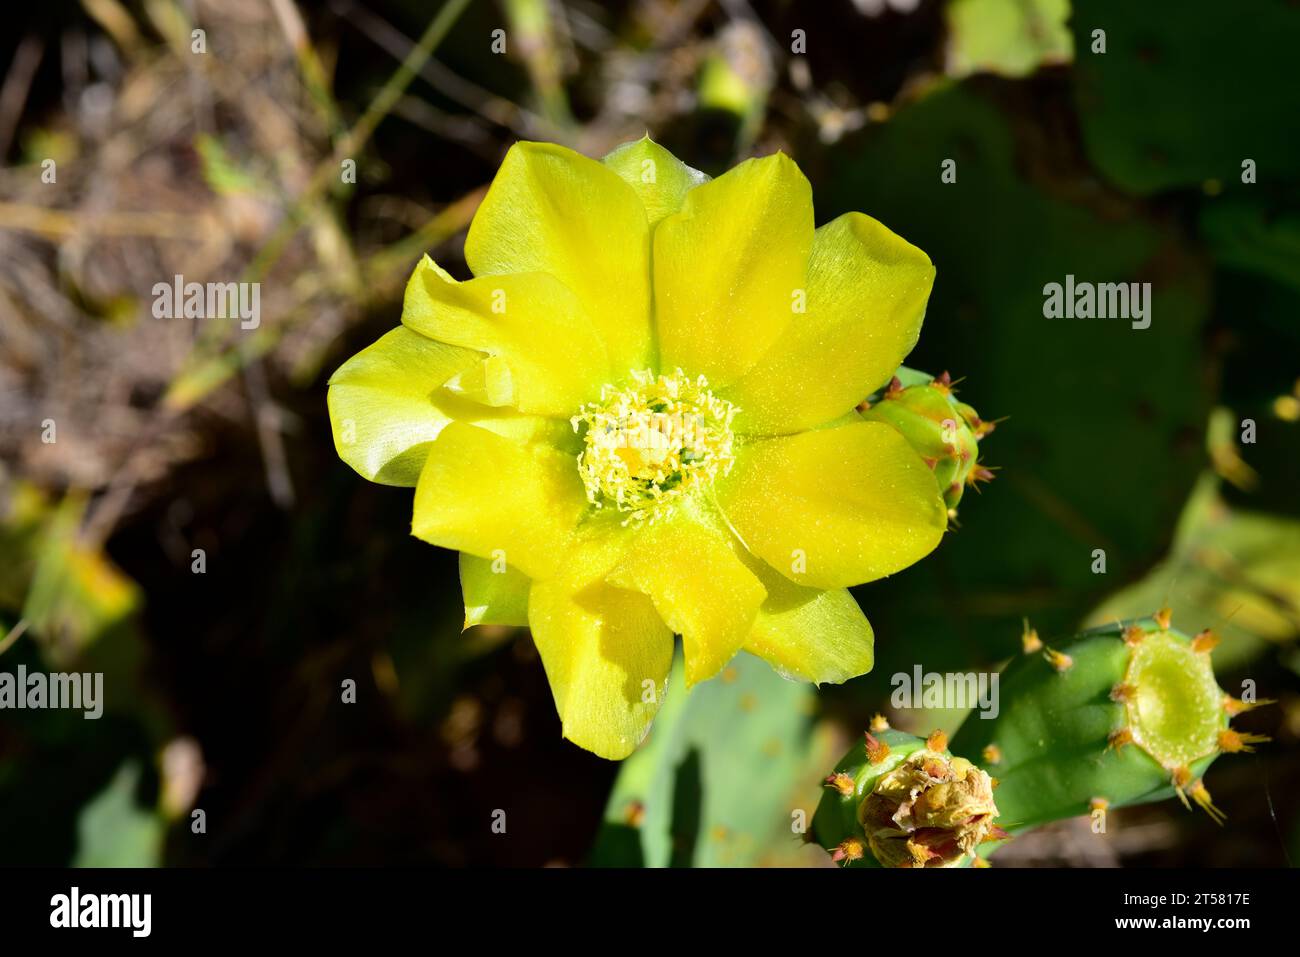 Tuna india (Opuntia dillenii) is a cactus native to Mexico, Central America and Caribe and naturalized in temperate regions of Europe. Flower detail. Stock Photo